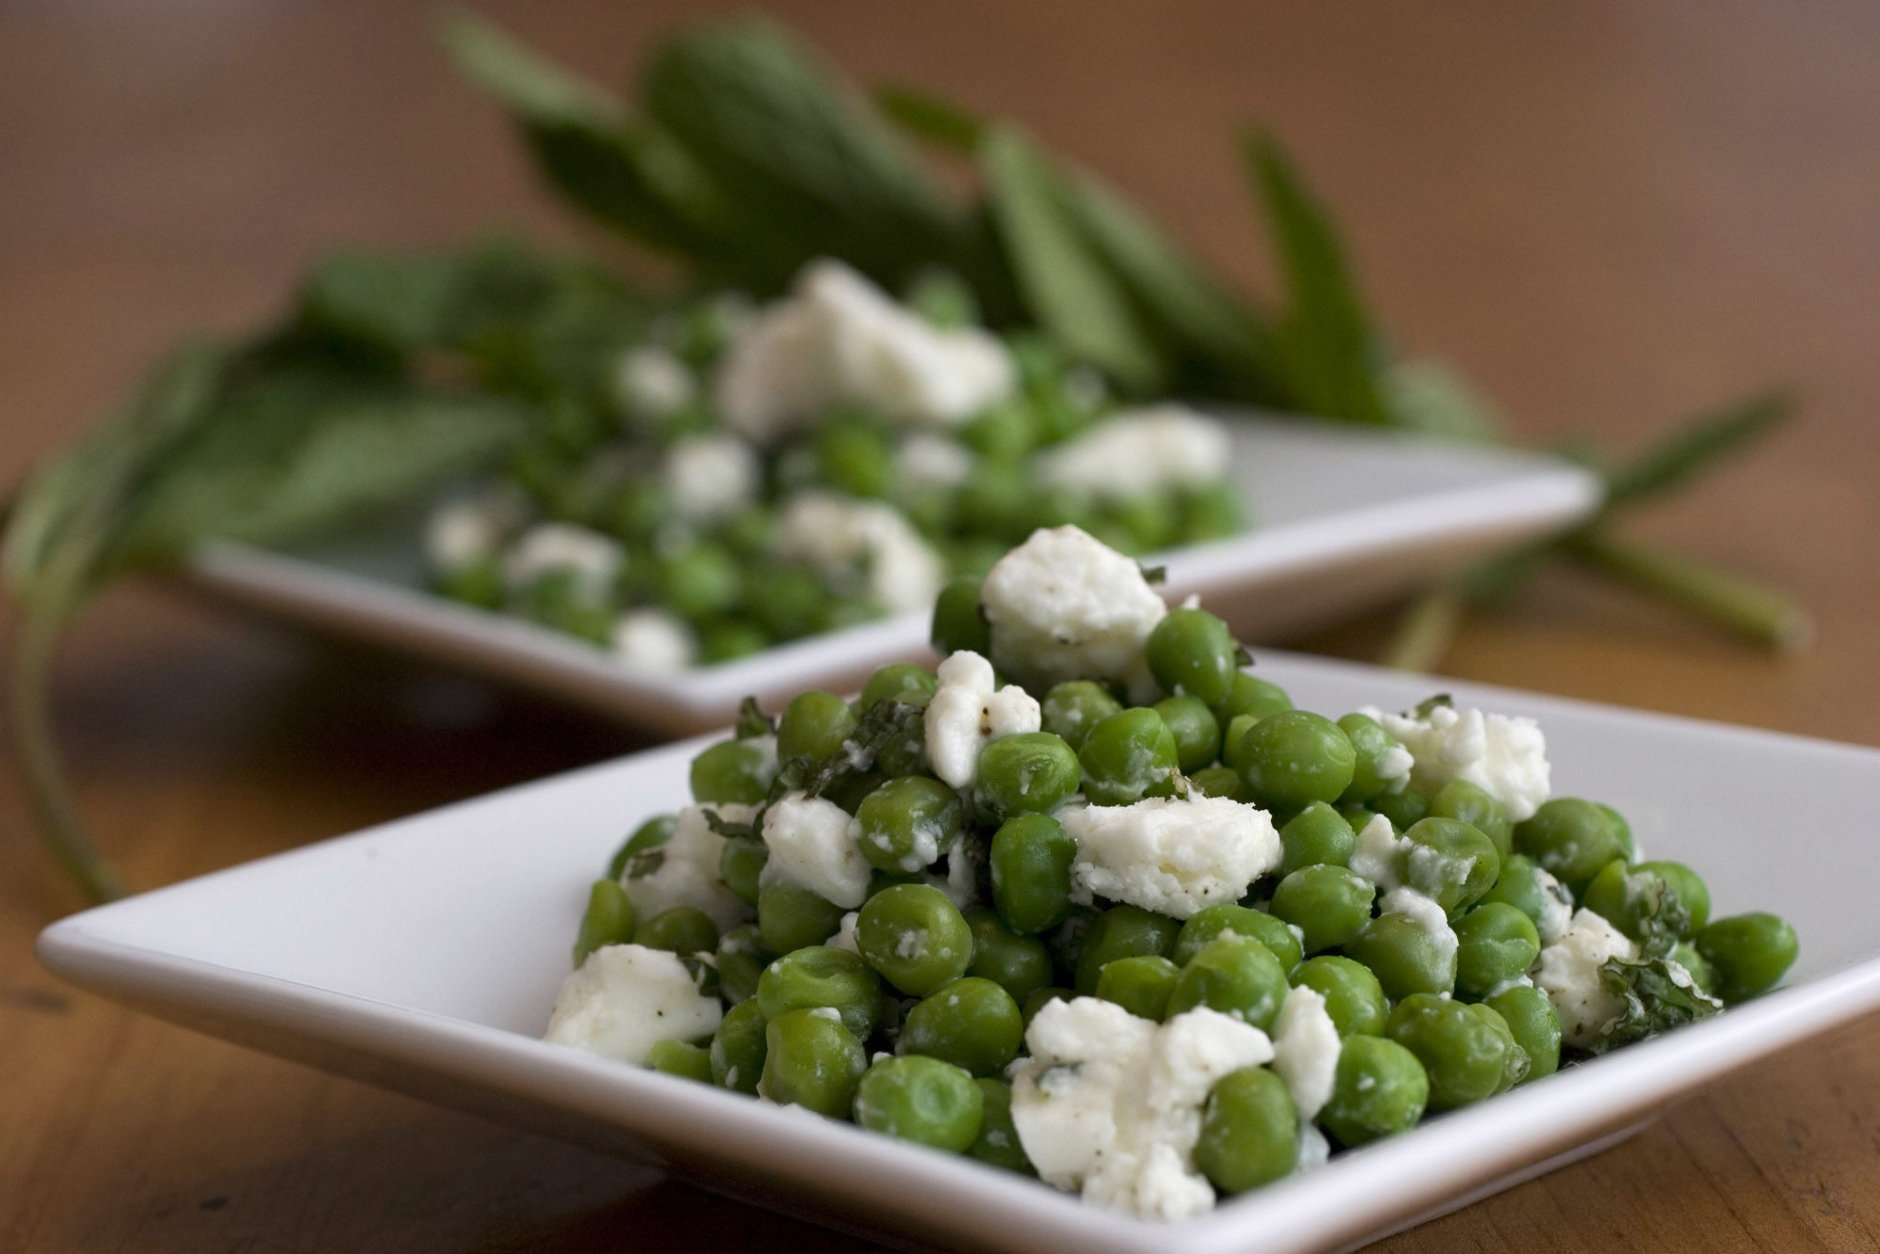 **FOR USE WITH AP LIFESTYLES**   A plate of Minted Peas with Feta Cheese is seen in this Sunday, March 2, 2008 photo. These Minted Peas with Feta Cheese are not only tasty but come packed with important vitamins and minerals. The recipe uses green peas which are actually legumes but a generally treated as vegetables.   (AP Photo/Larry Crowe)